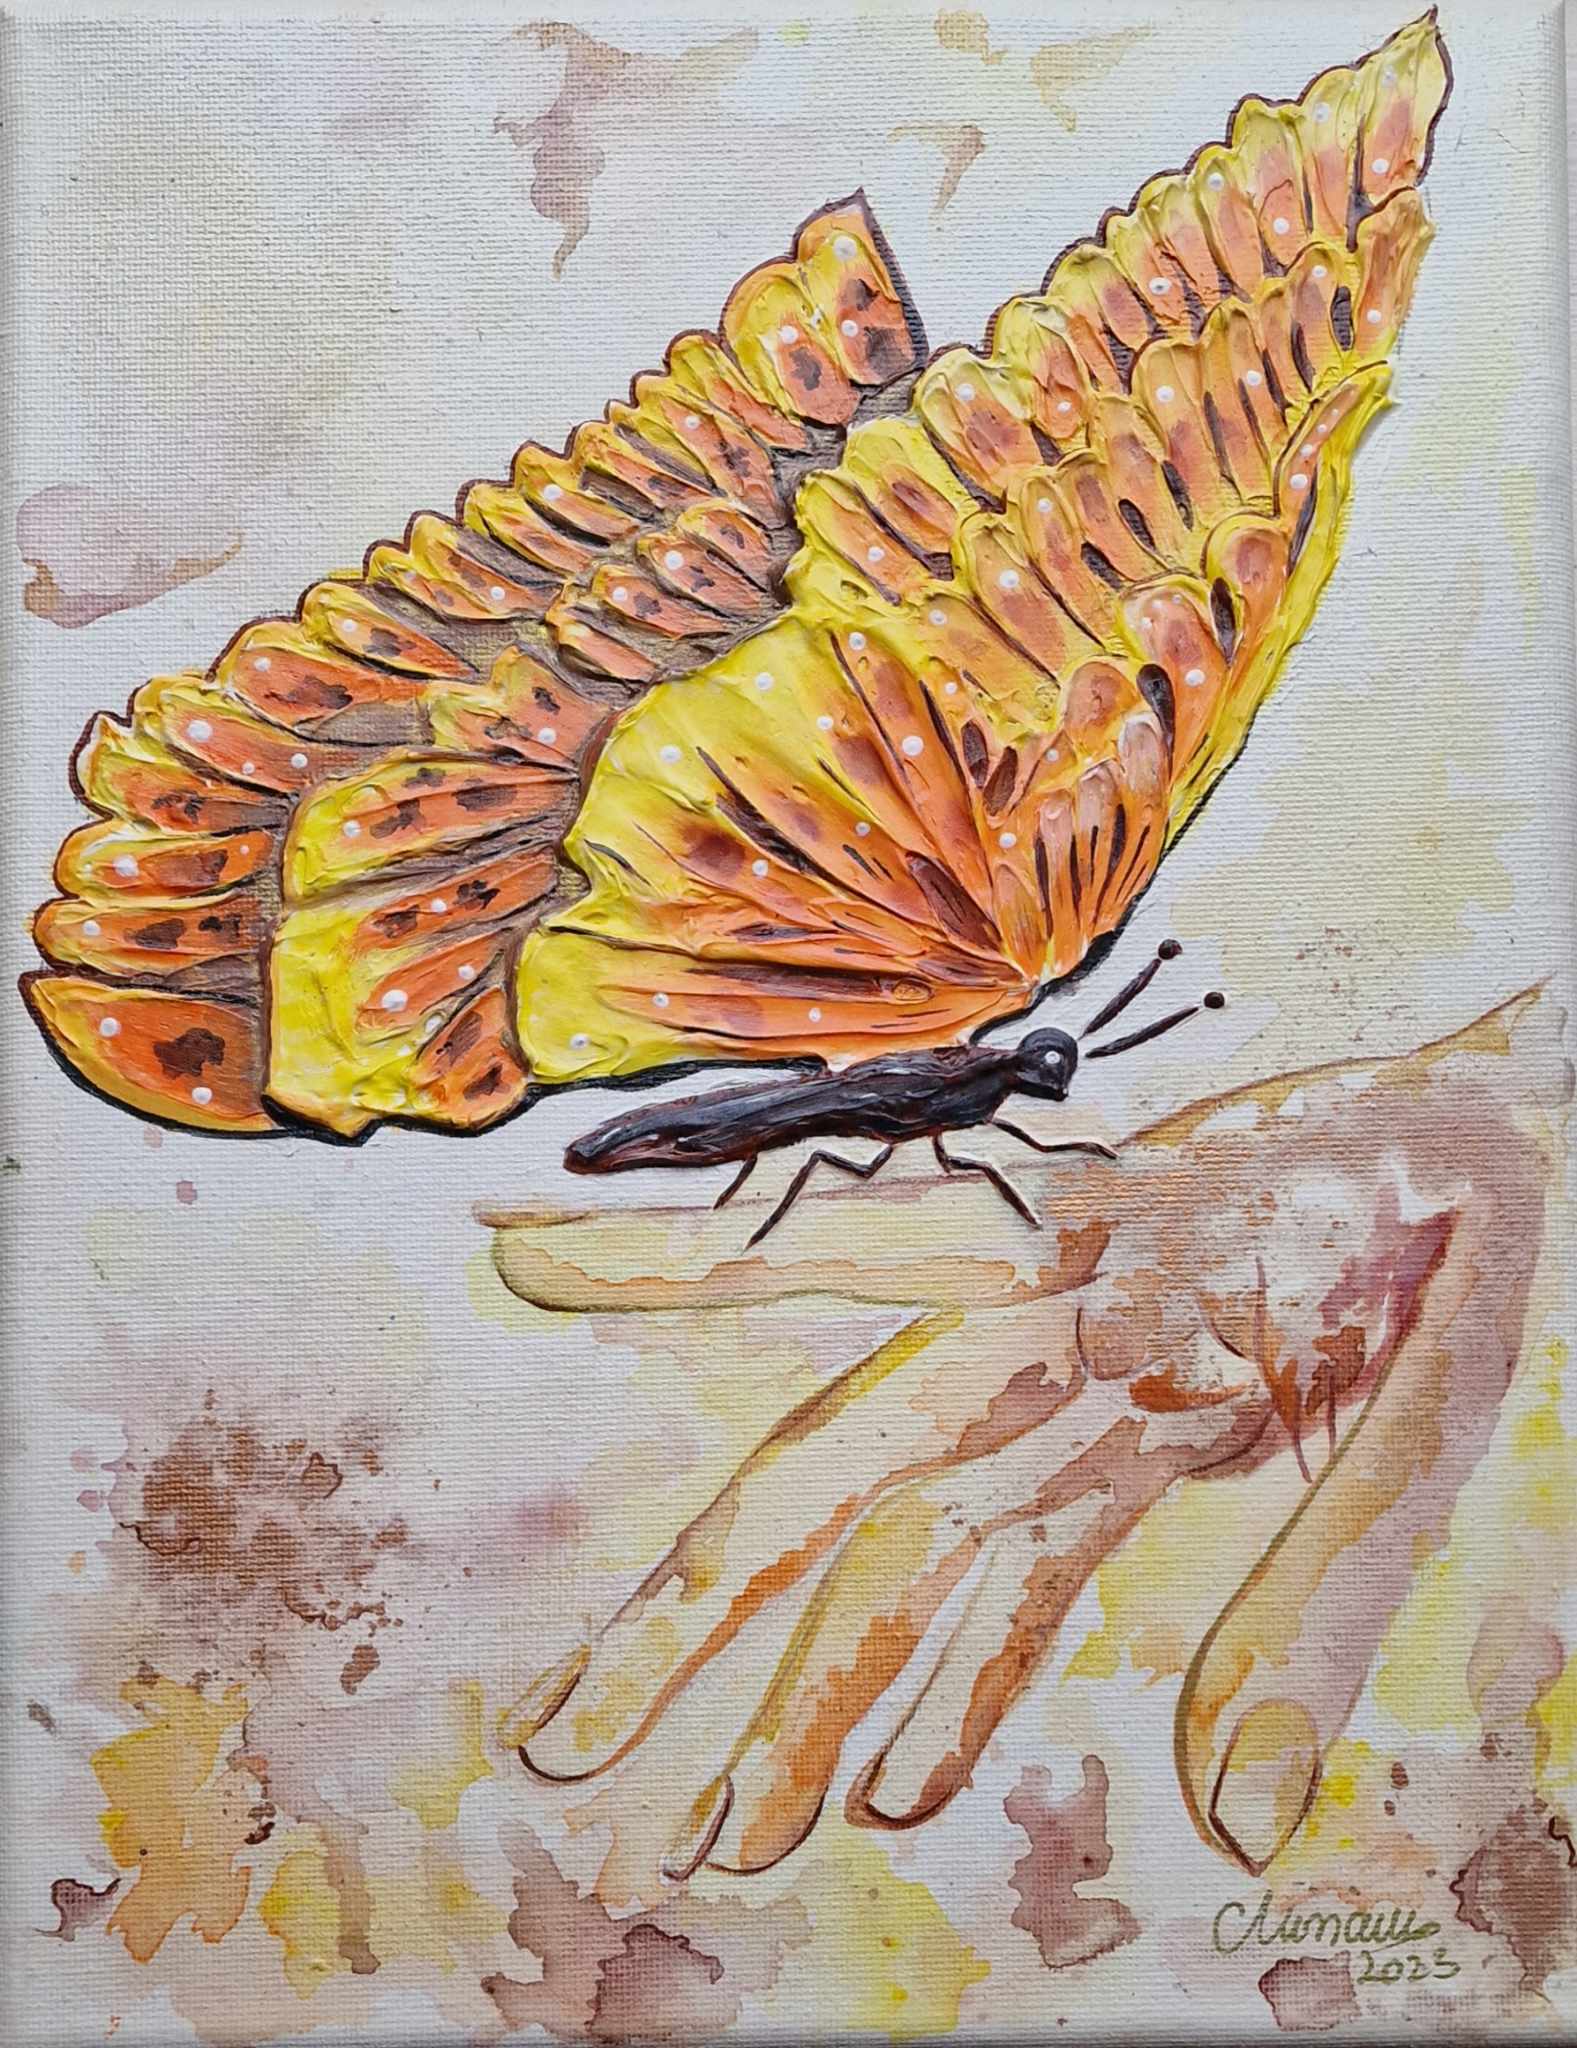 This painting is the second one of mini series that contains 4 pieces representing the 4 seasons named "Butterfly #2- Autumn